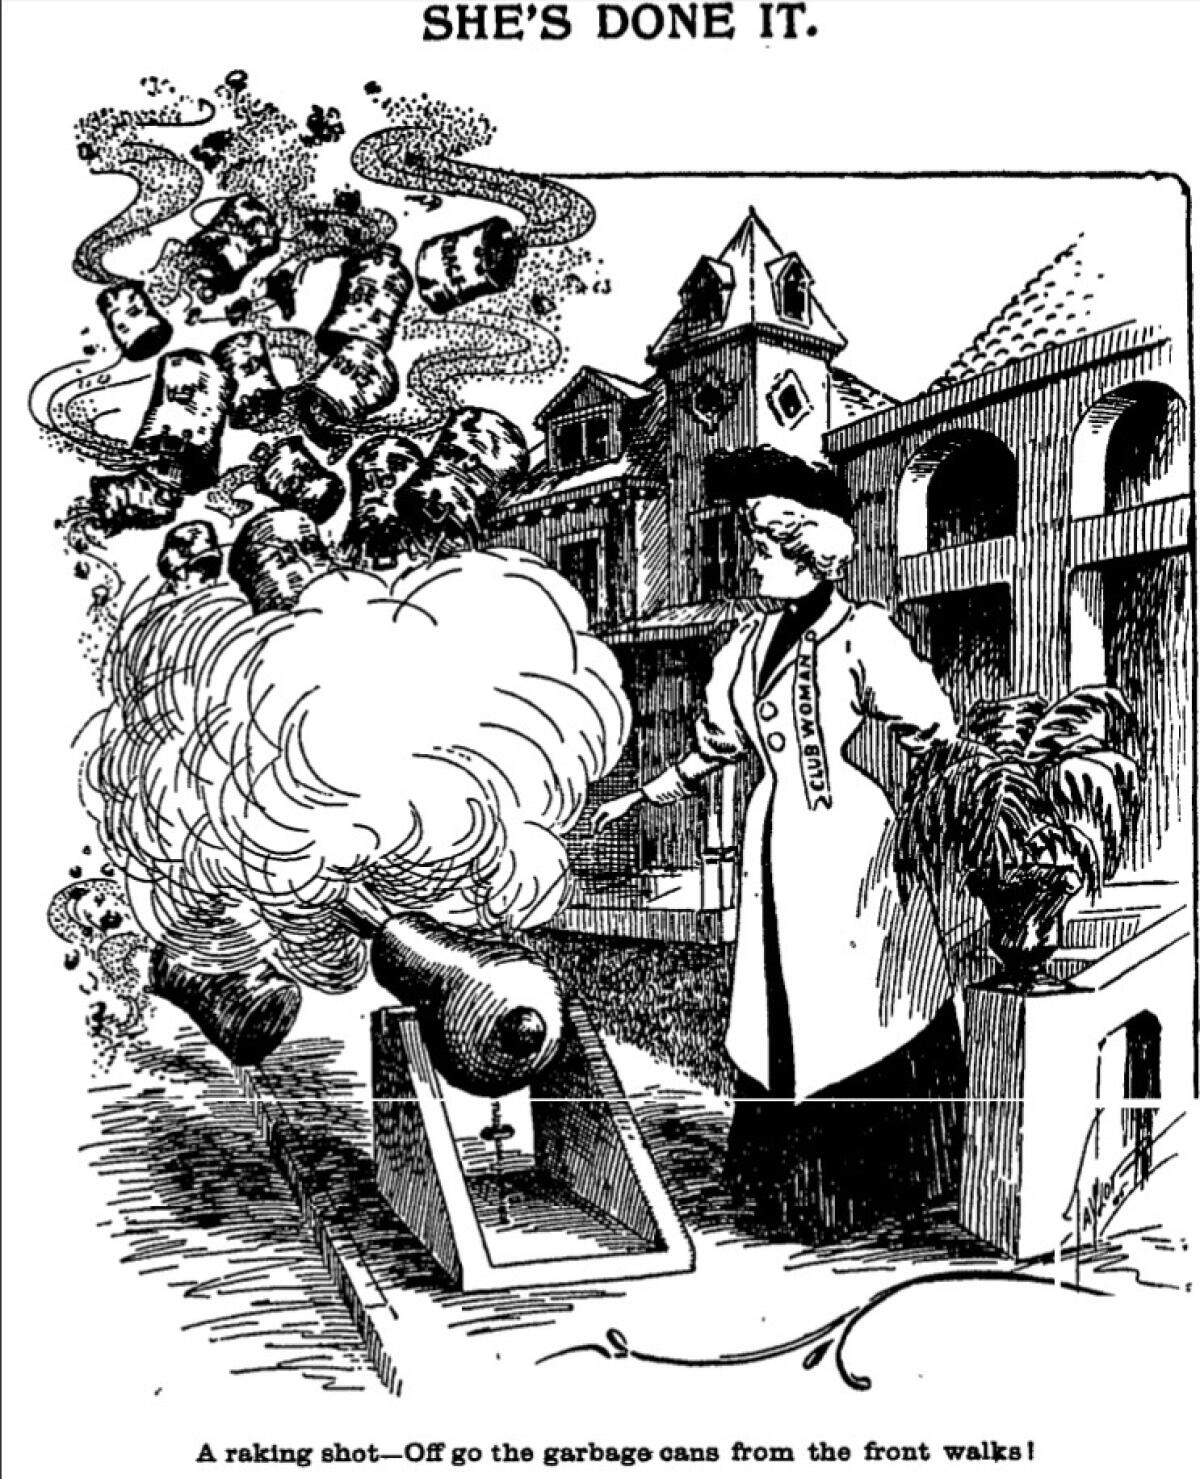 Cartoon shows a woman with a cannon, shooting garbage cans off a residential sidewalk.